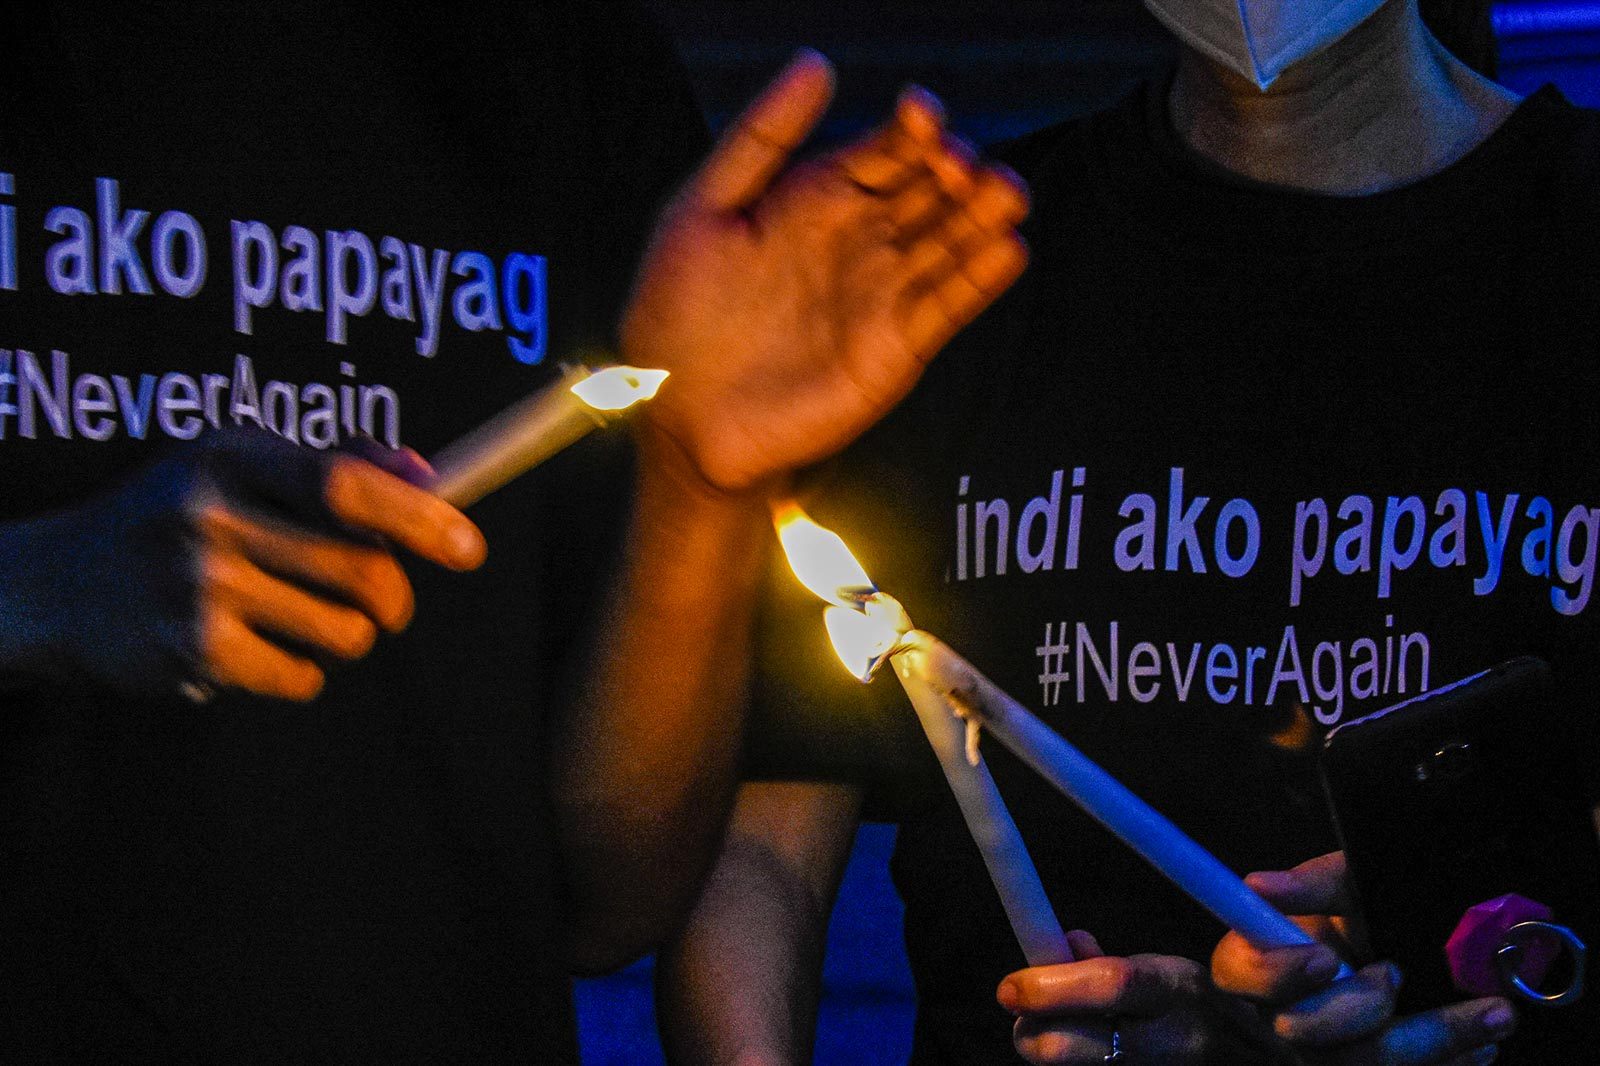 [OPINION] Remember the essence of the EDSA Revolution this 2022 elections